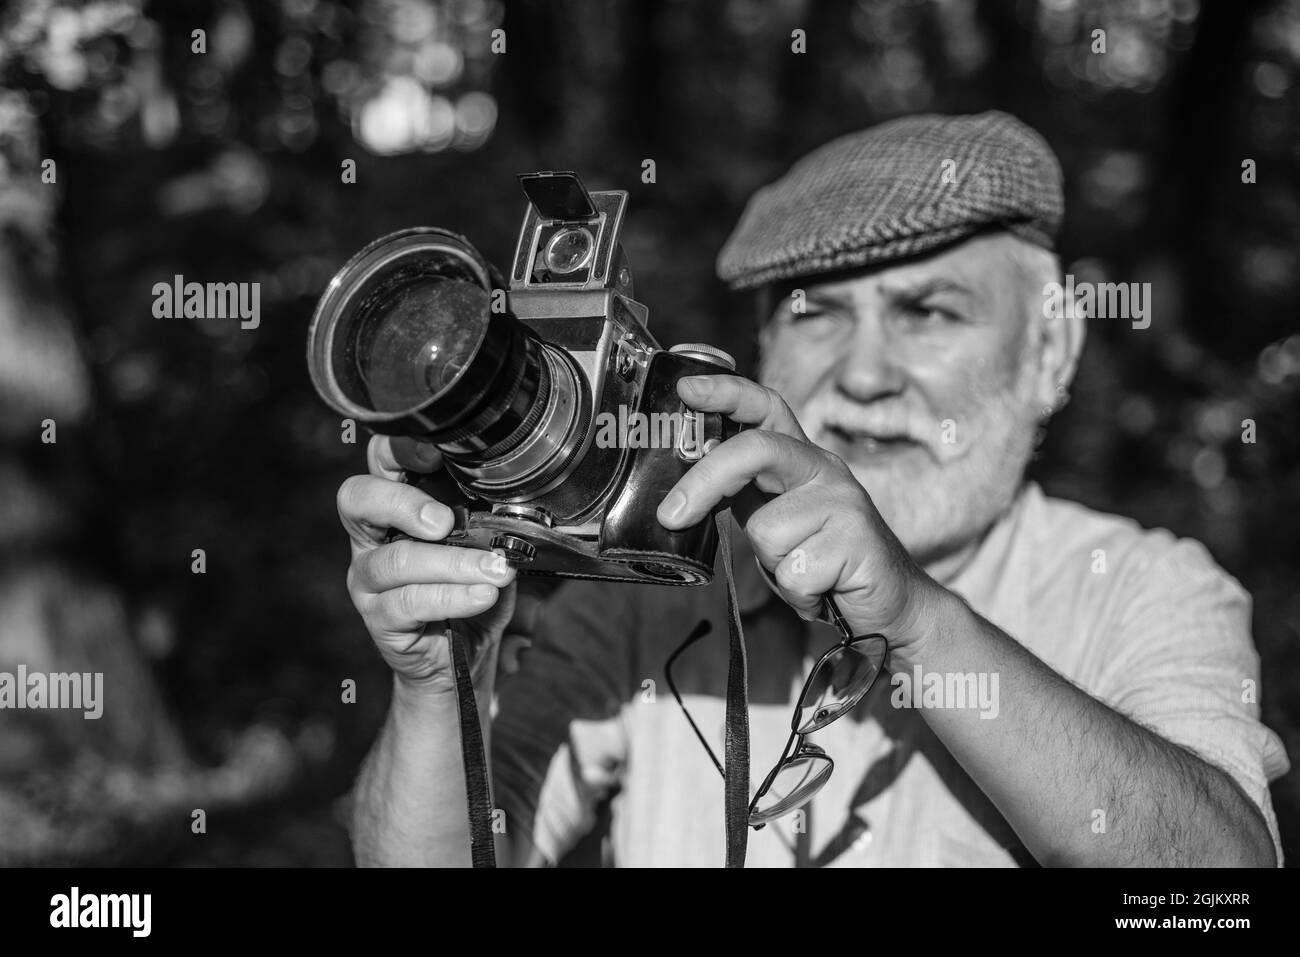 He likes birdwatching. Make perfect frame. Old photographer filming. Manual settings. Pension hobby. Experienced photographer. Vintage camera. Old man Stock Photo